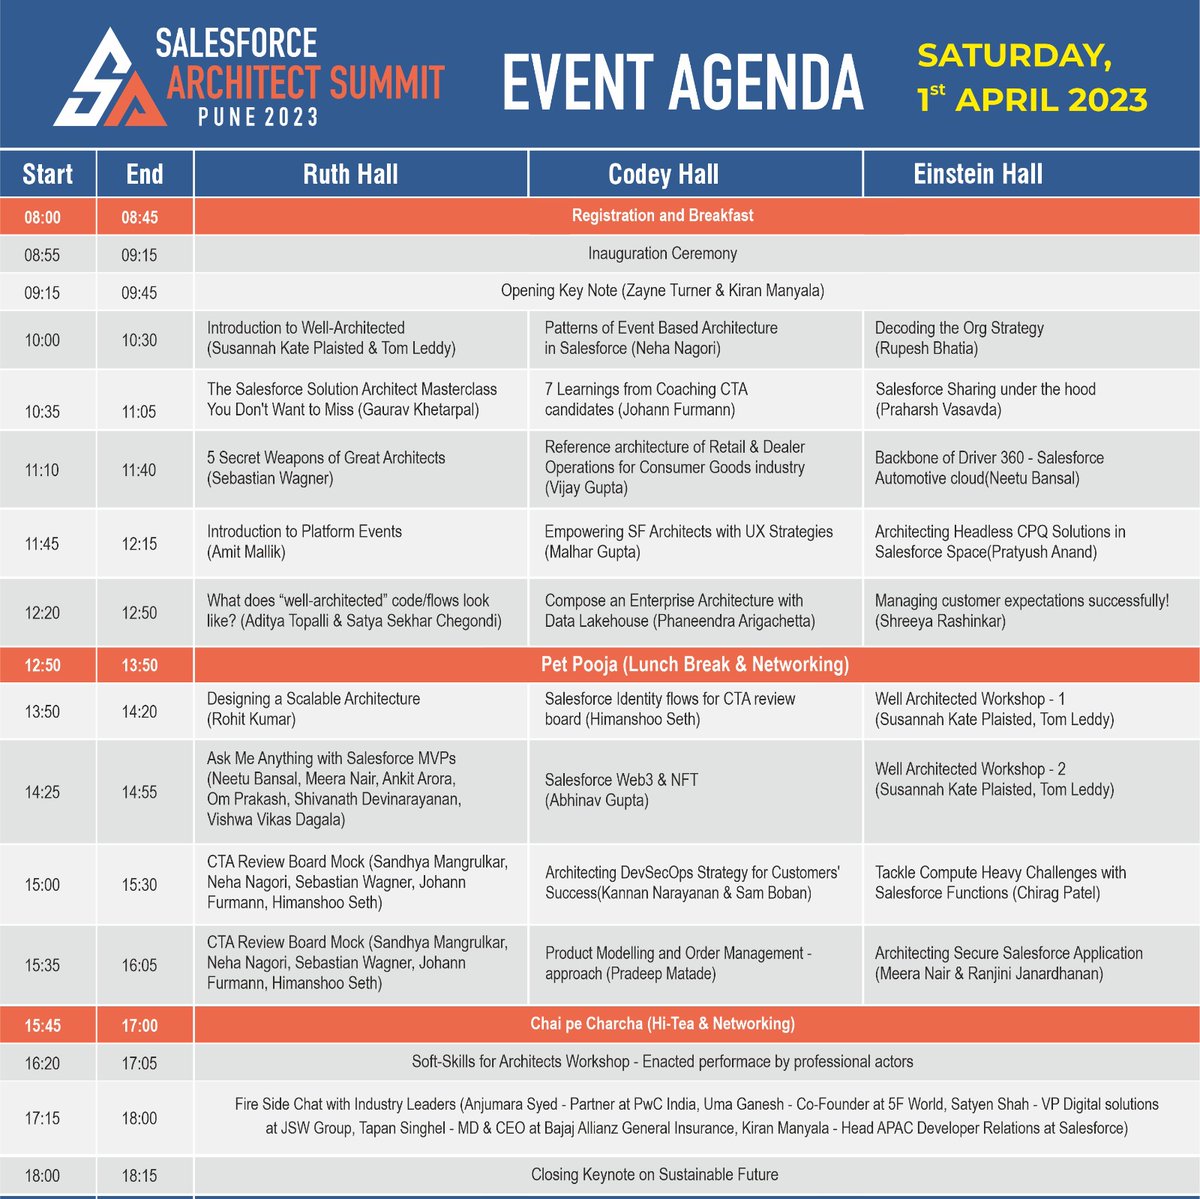 Presenting you the agenda for the most awaited event of the season. Salesforce Architect Summit will be a great way to learn new skills, explore your talent, experience never-before sessions, meet new people, and make valuable connections. Have a look at the #SAS23 agenda 👇🏻